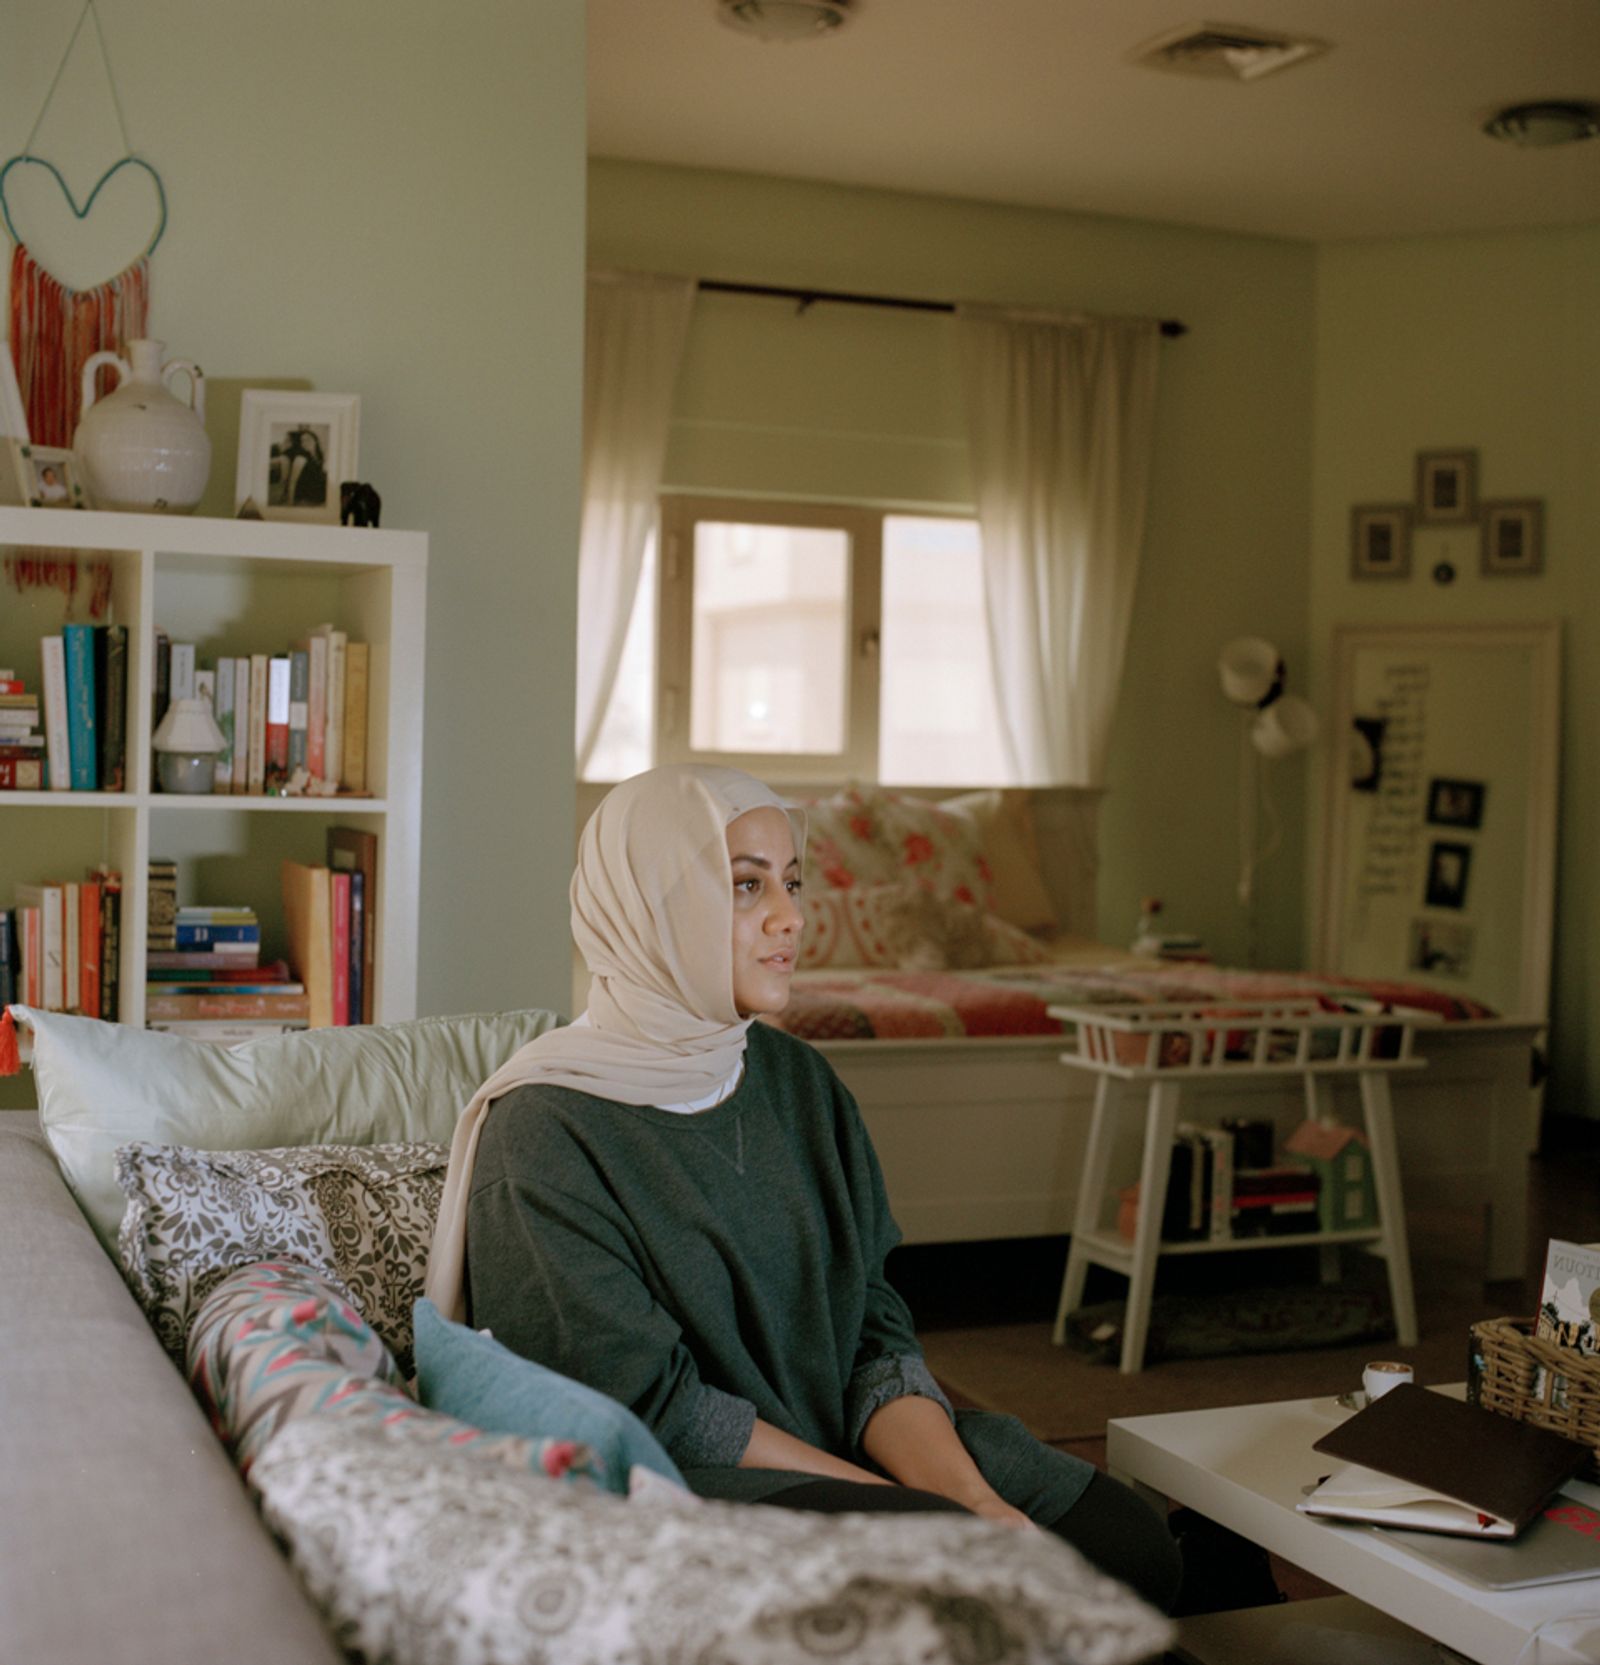 © Maha Alasaker - Image from the Women of kuwait photography project